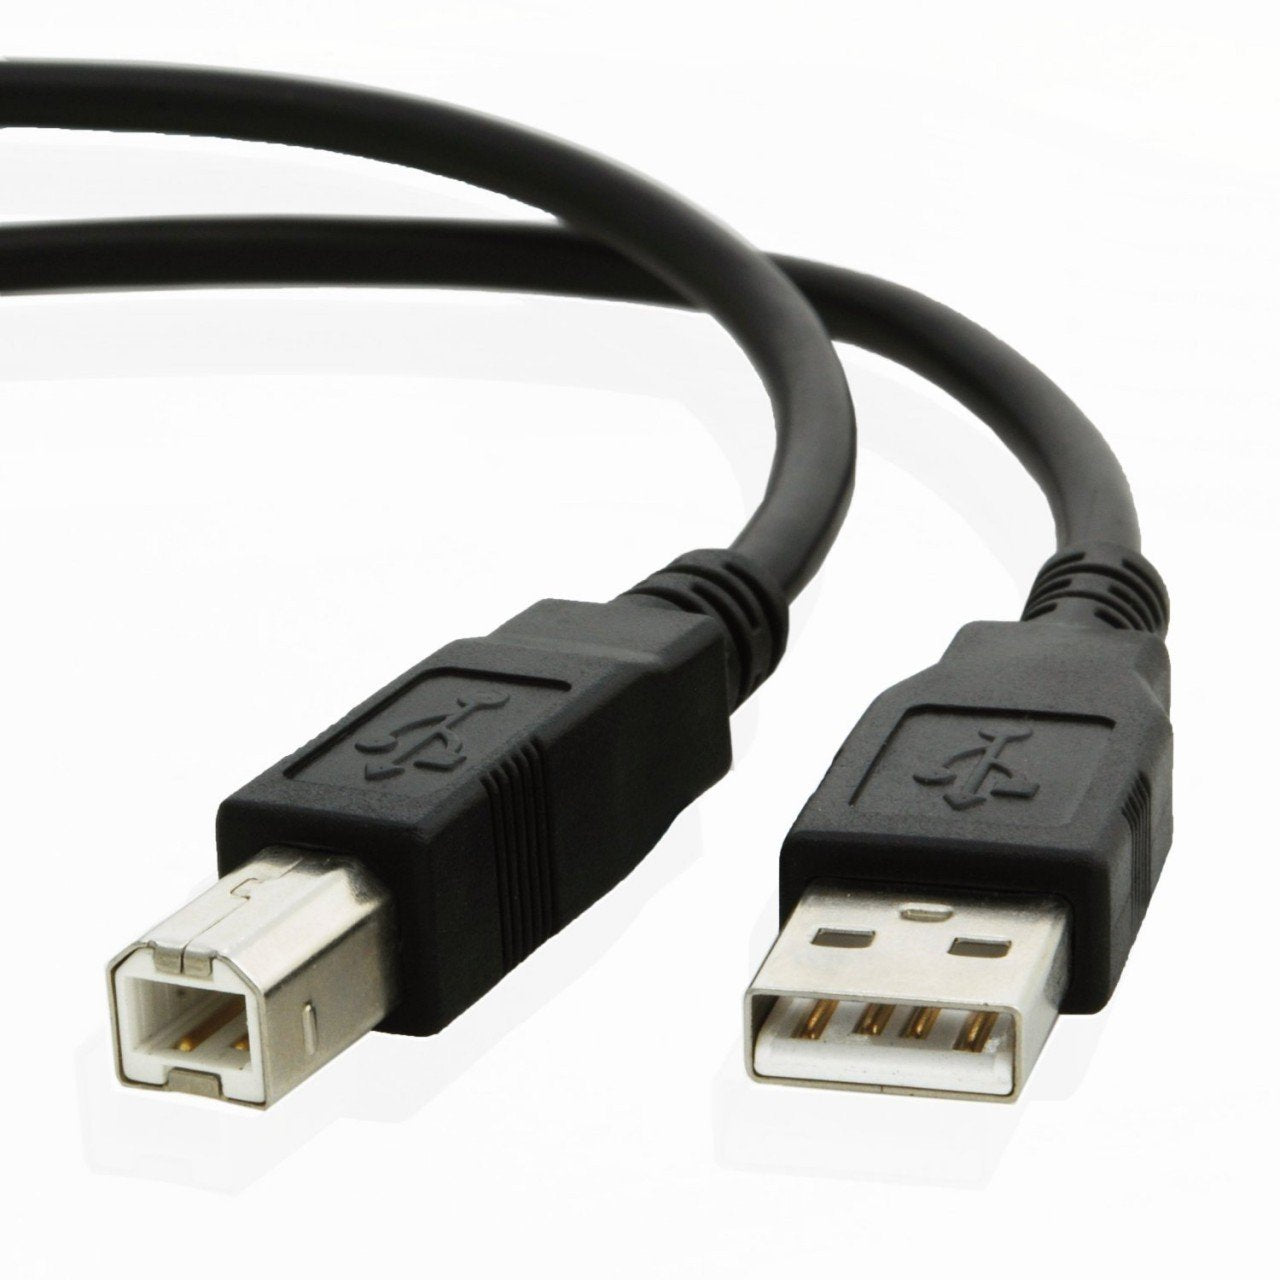 USB cable for Canon PIXMA TS6050